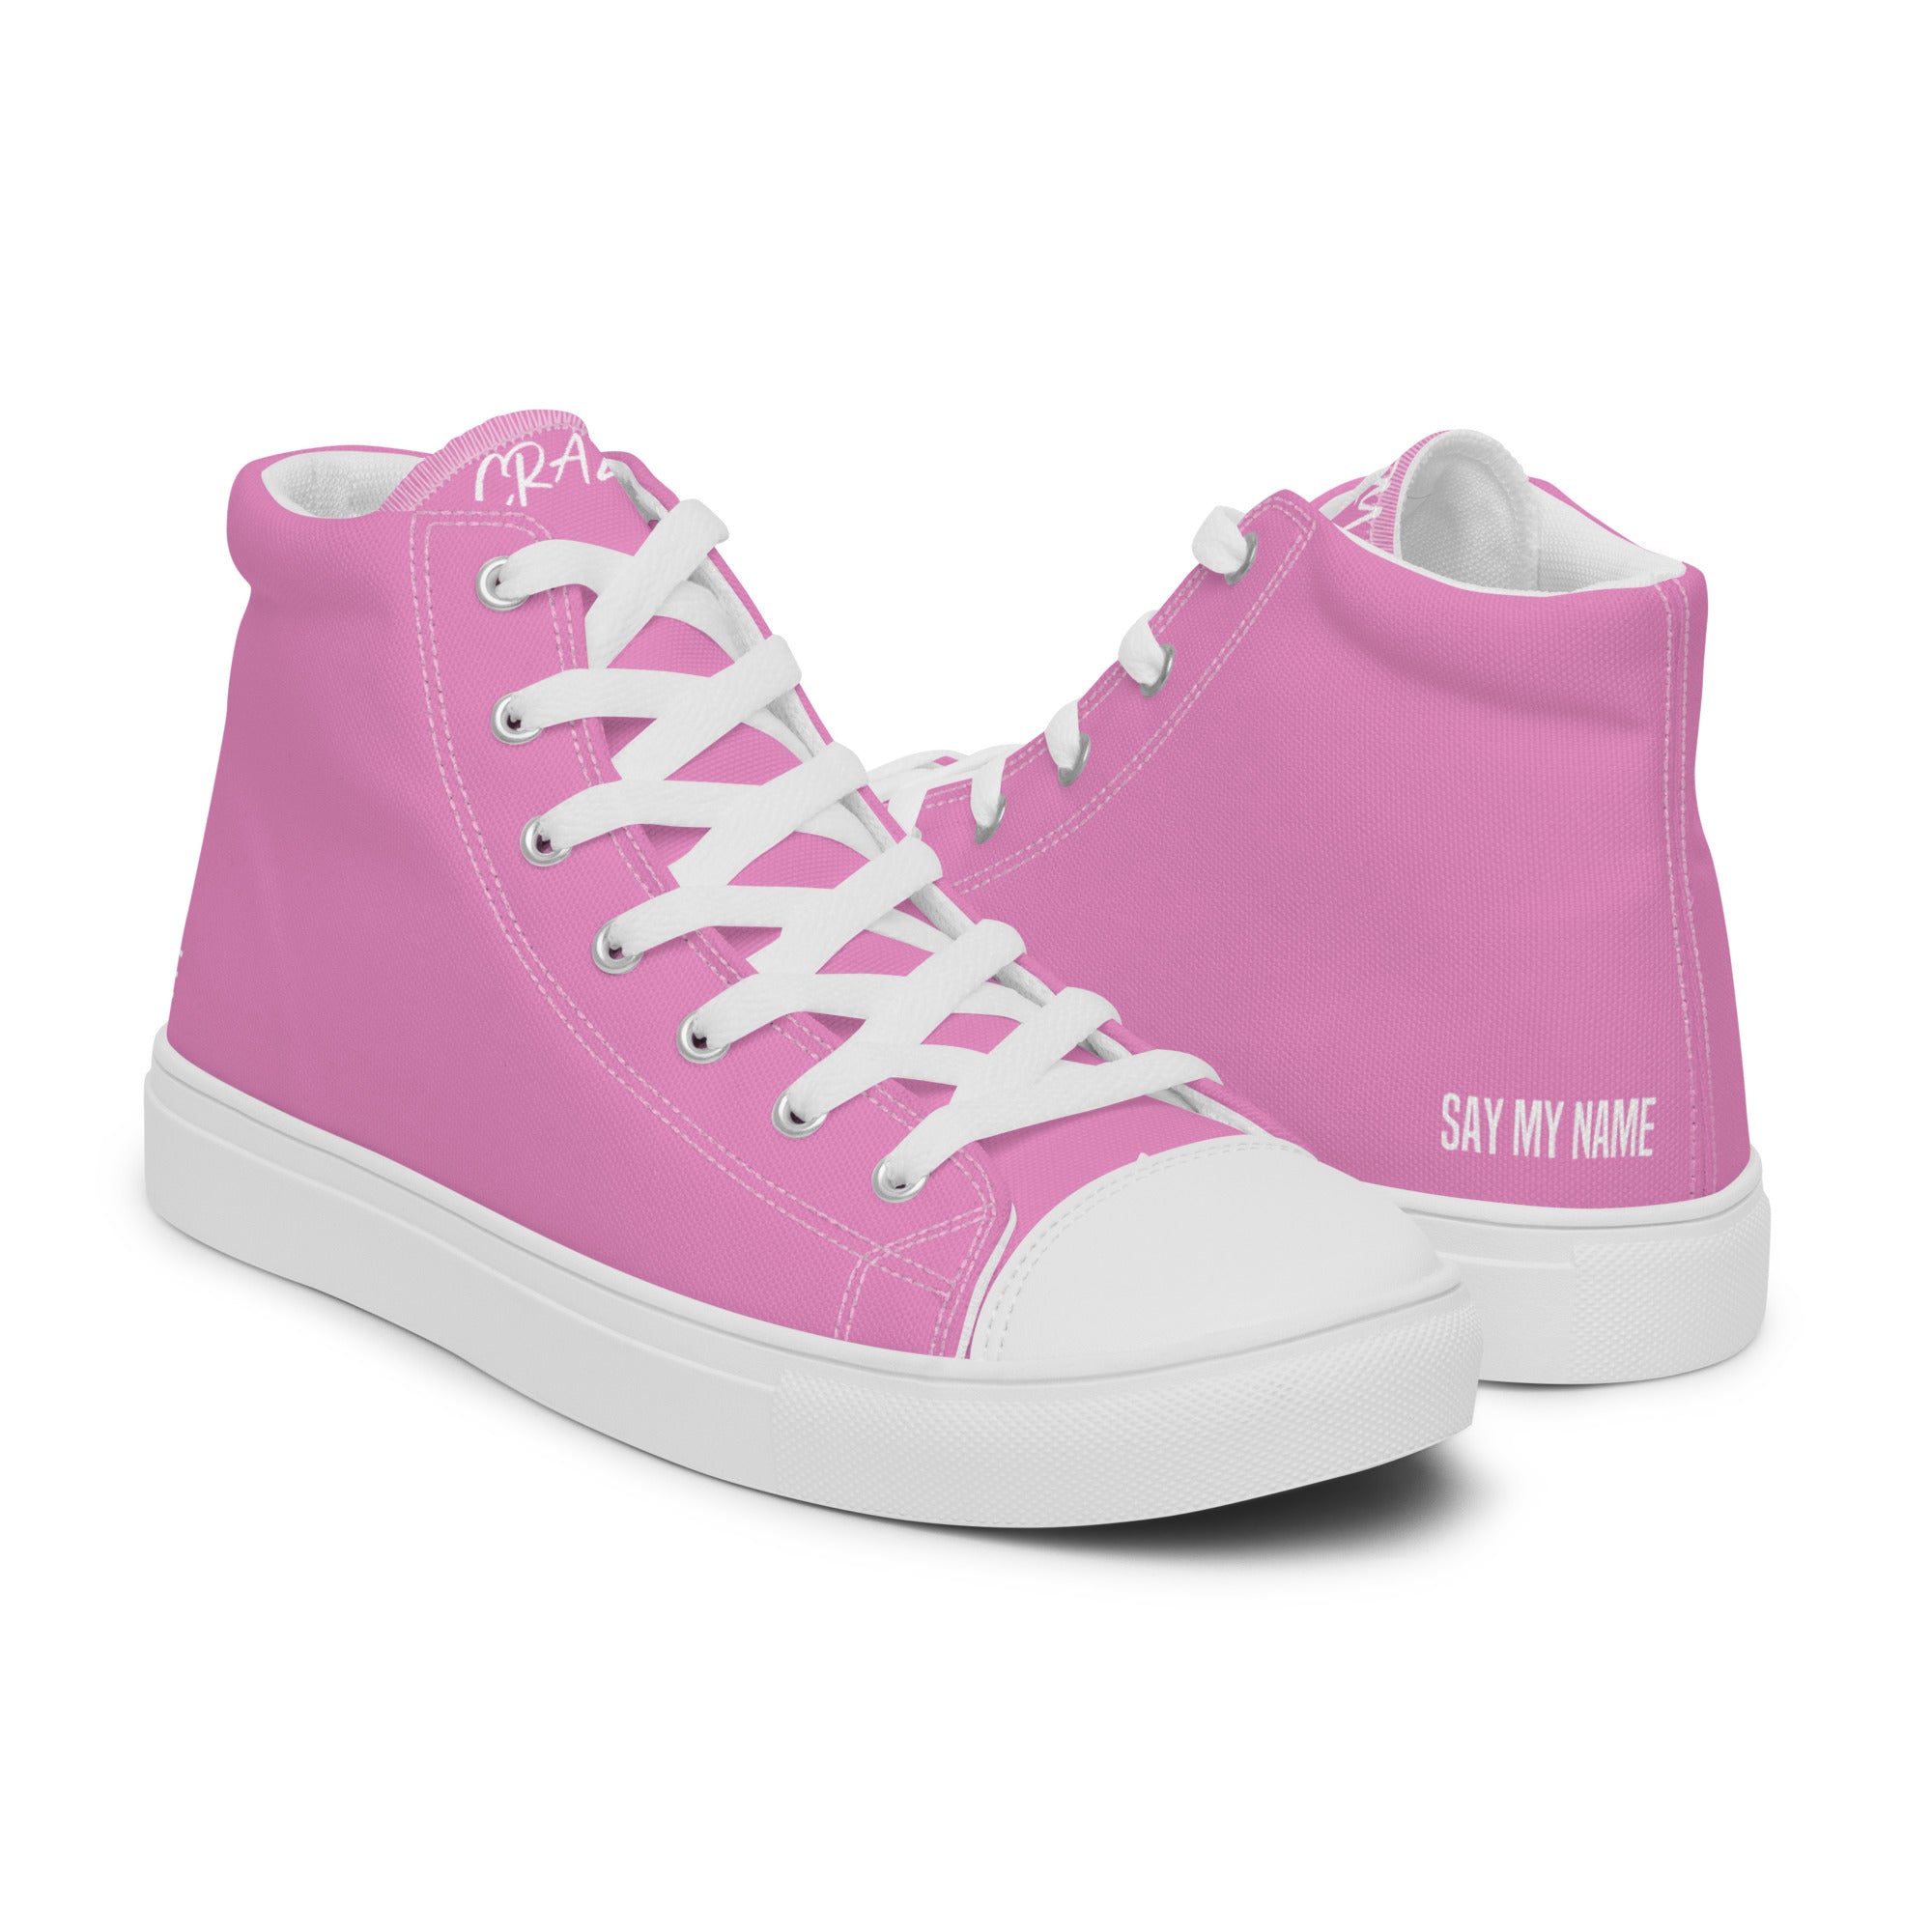 "SAY MY NAME" women's high-top pink canvas sneakers